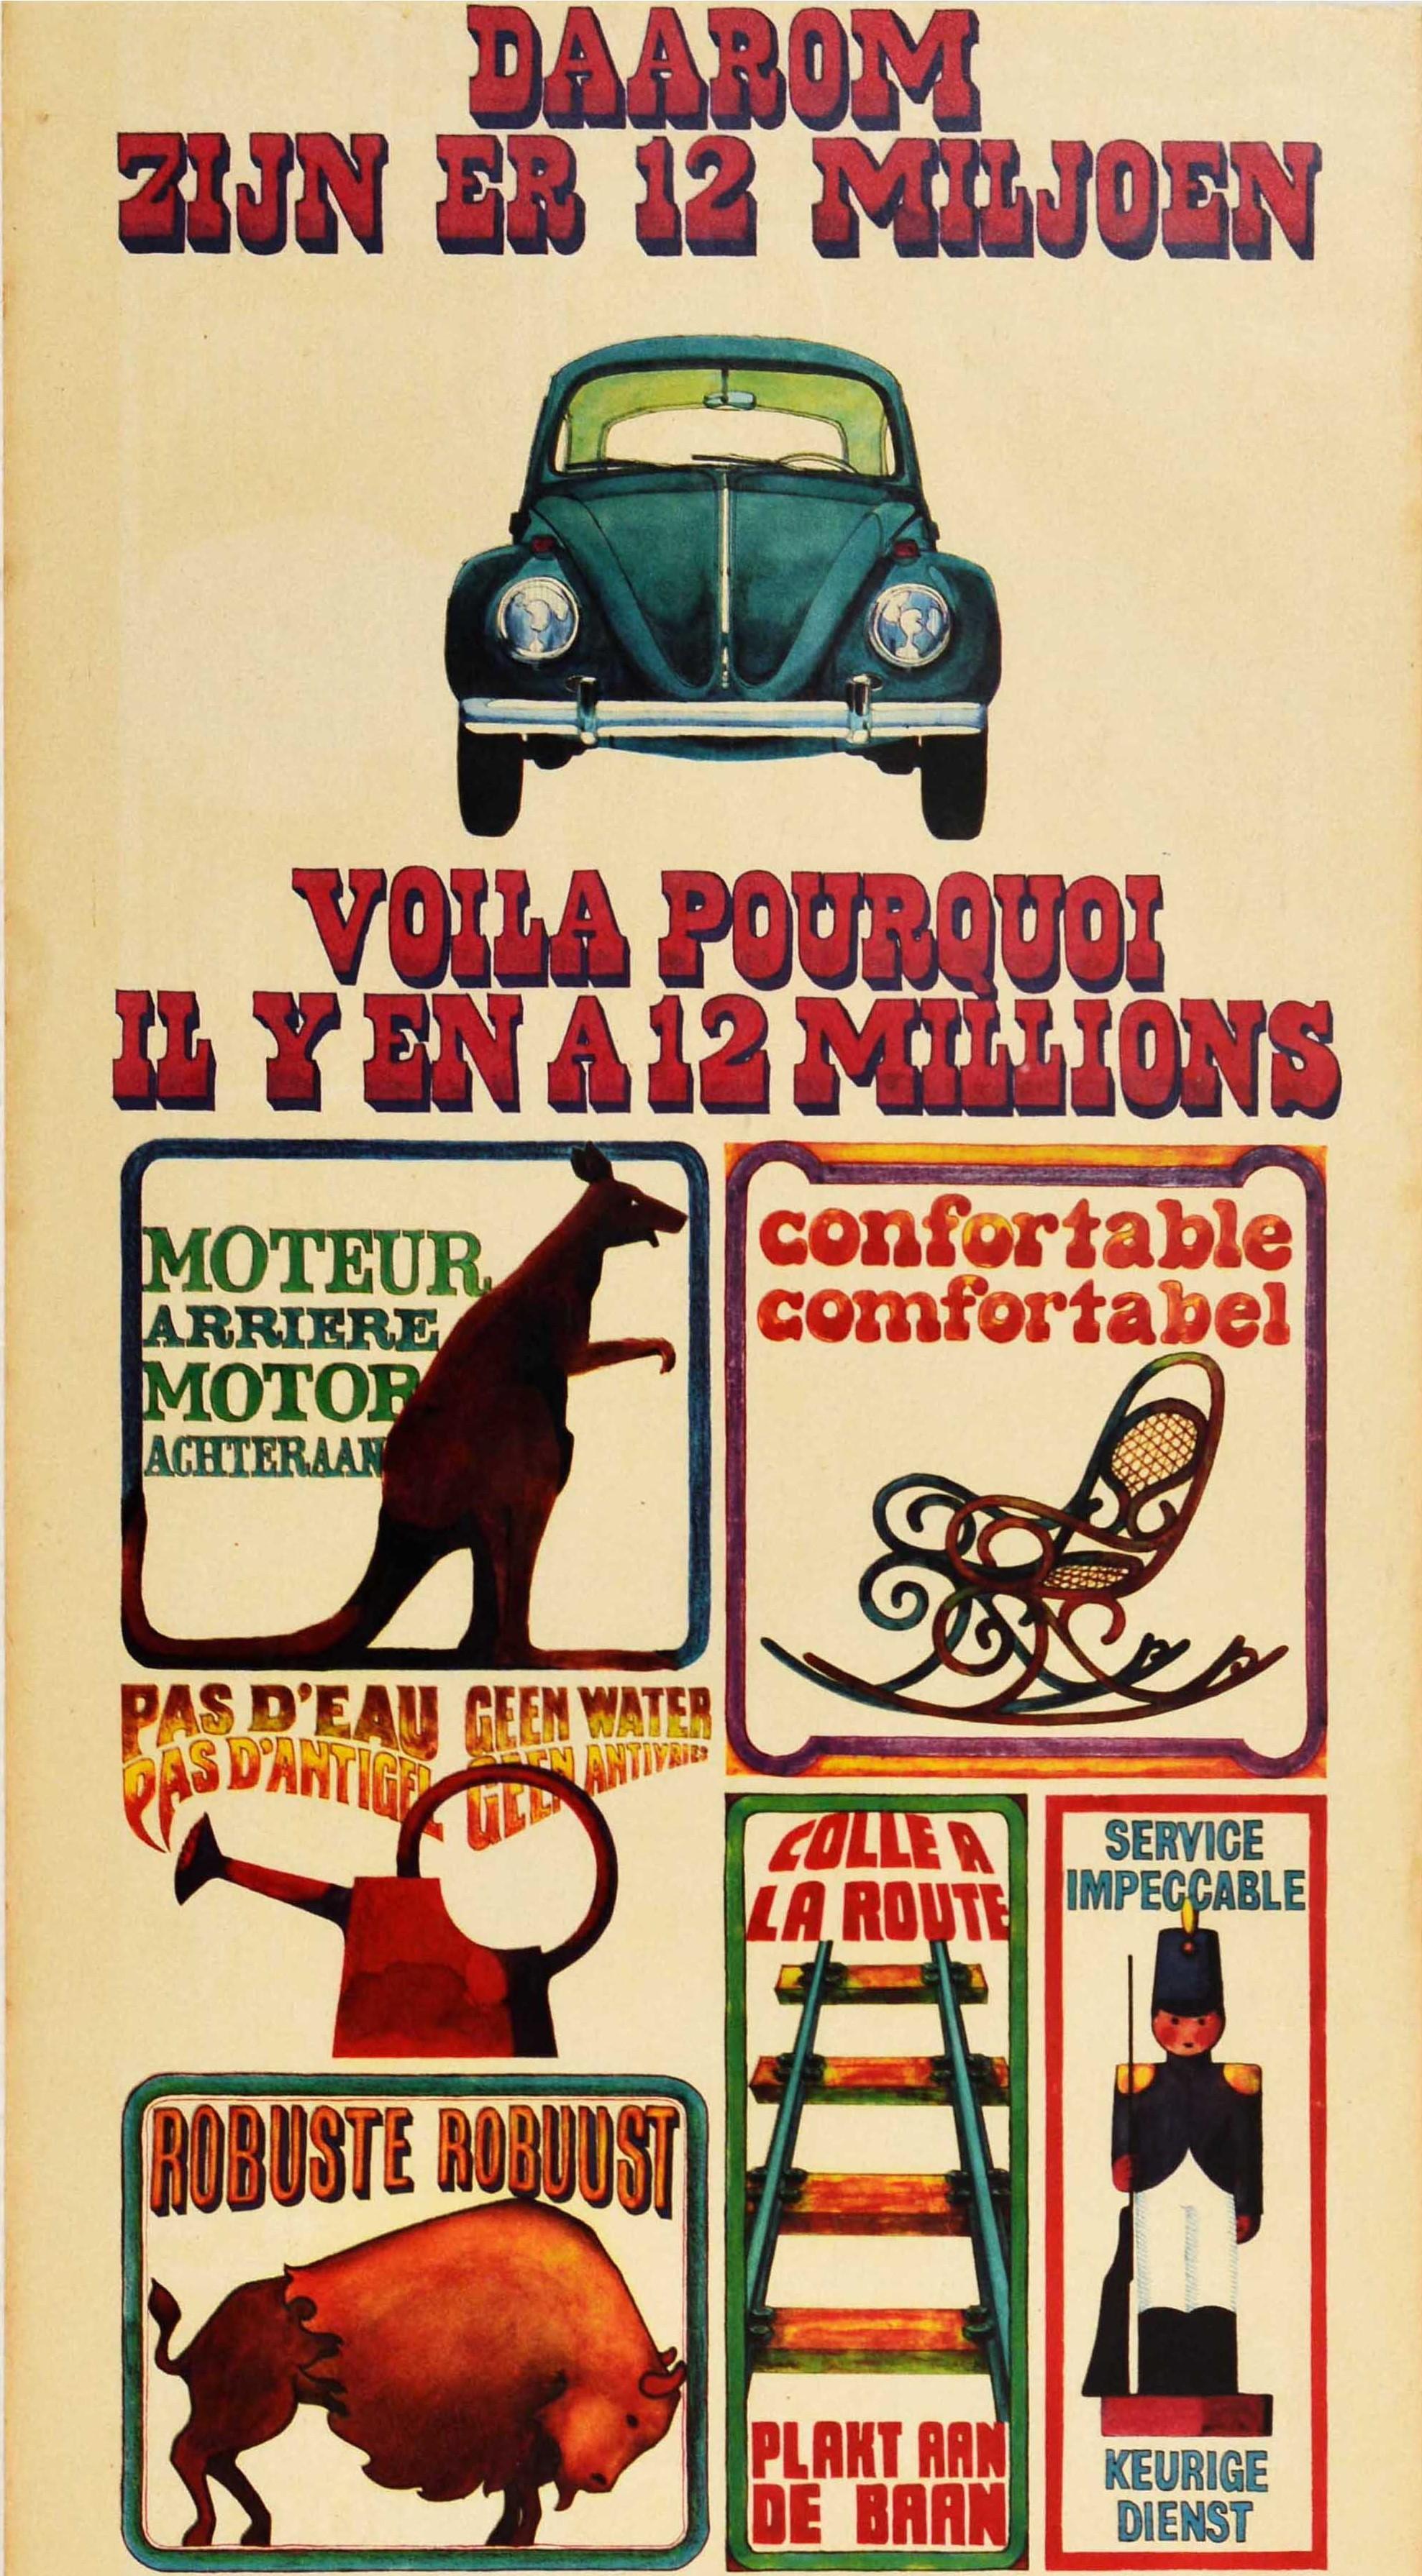 Original vintage car advertising poster for Volkswagen Beetle in Dutch and French - Daarum zijn er 12 miljoen Voila pourquoi il y en 12 millions / That's why there are 12 million - featuring fun colourful framed illustrations with stylised lettering